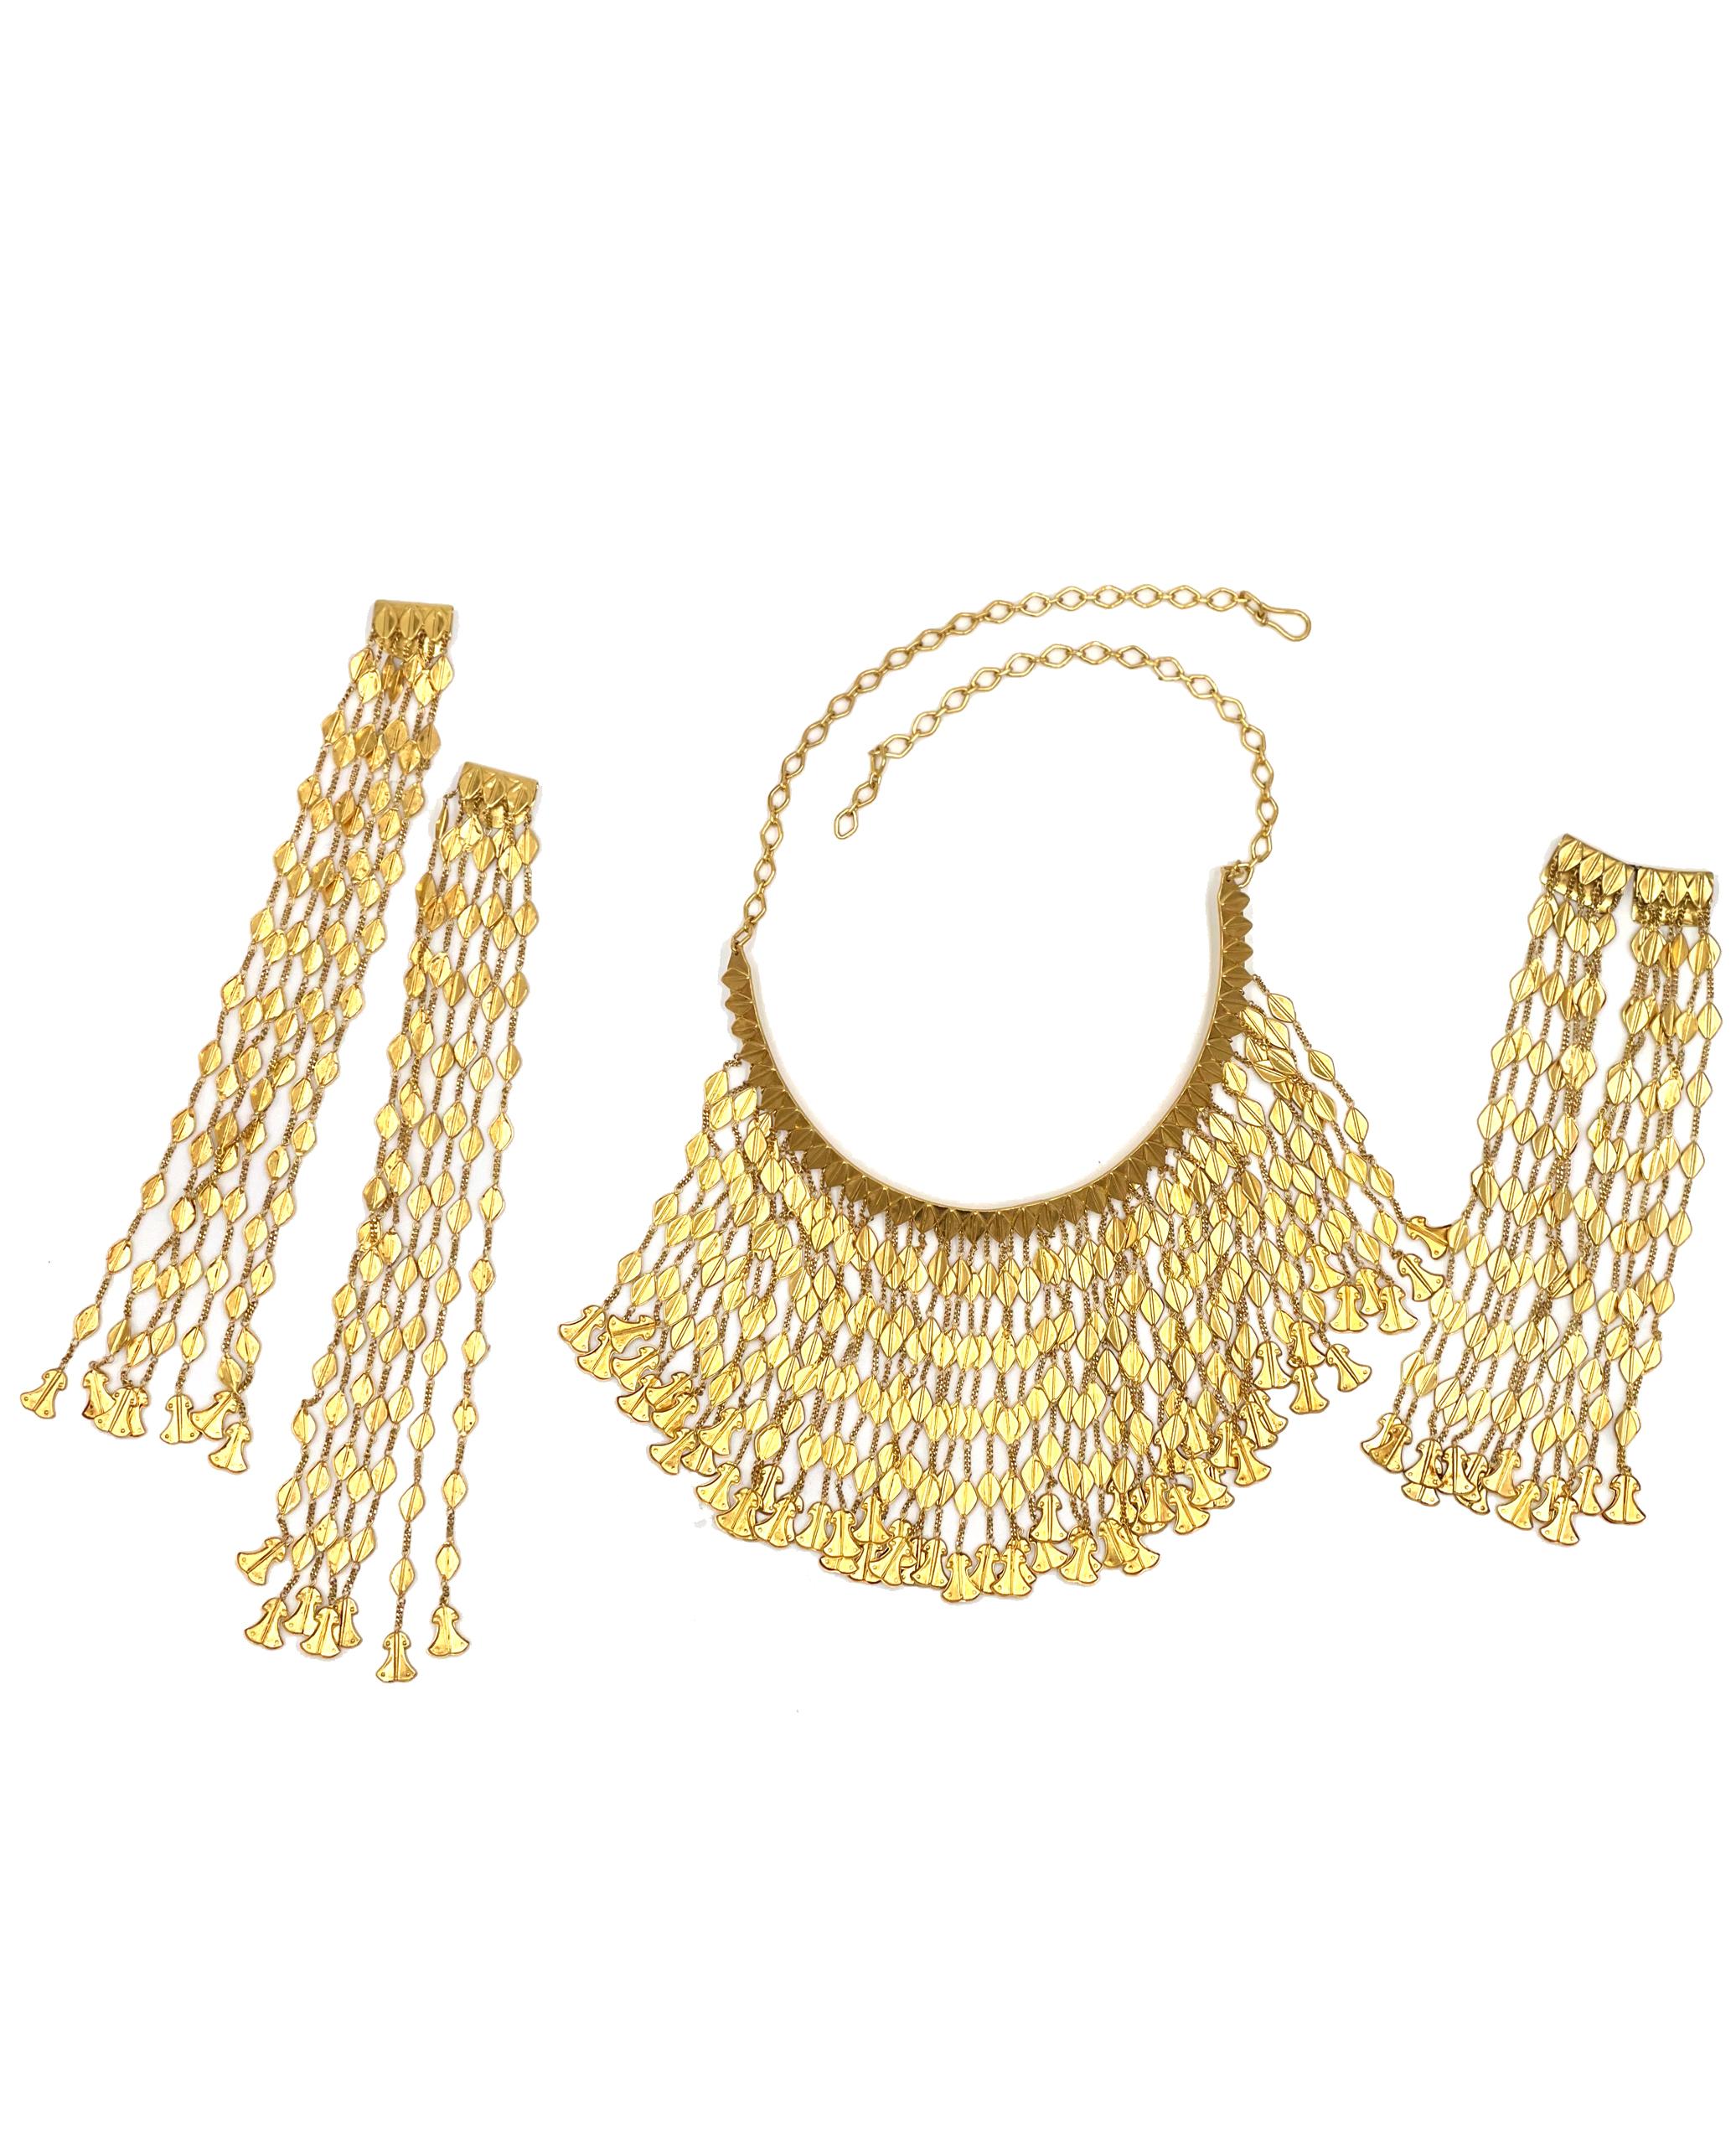 Pre owned vintage 18K yellow gold necklace by Ilias Lalaounis, Helen of Troy Collection. The necklace has a curved center bar that has a fringe of chain pieces.  The fringe is 56 strands, each one 6 inches long.  The necklace weighs 107.3